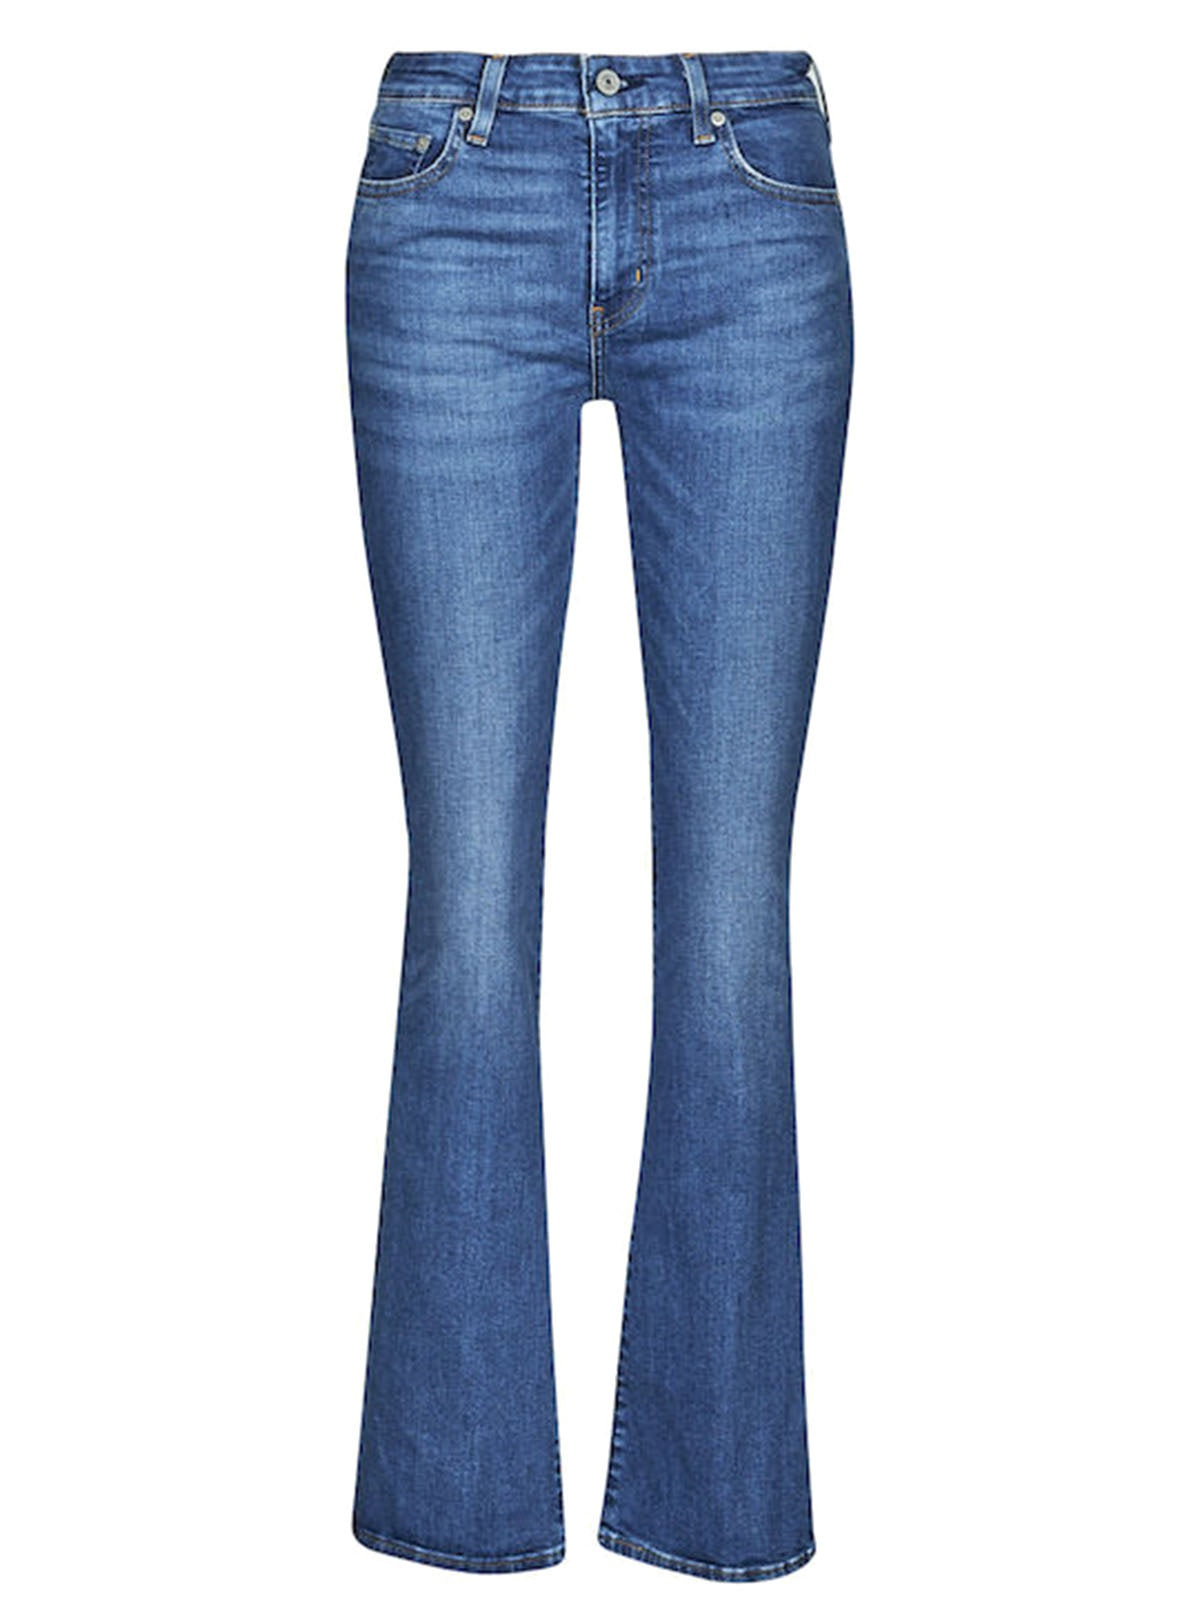 Jeans Donna Levi's - 725 High Rise Bootcut Jeans - Blow Your Mind - Blu